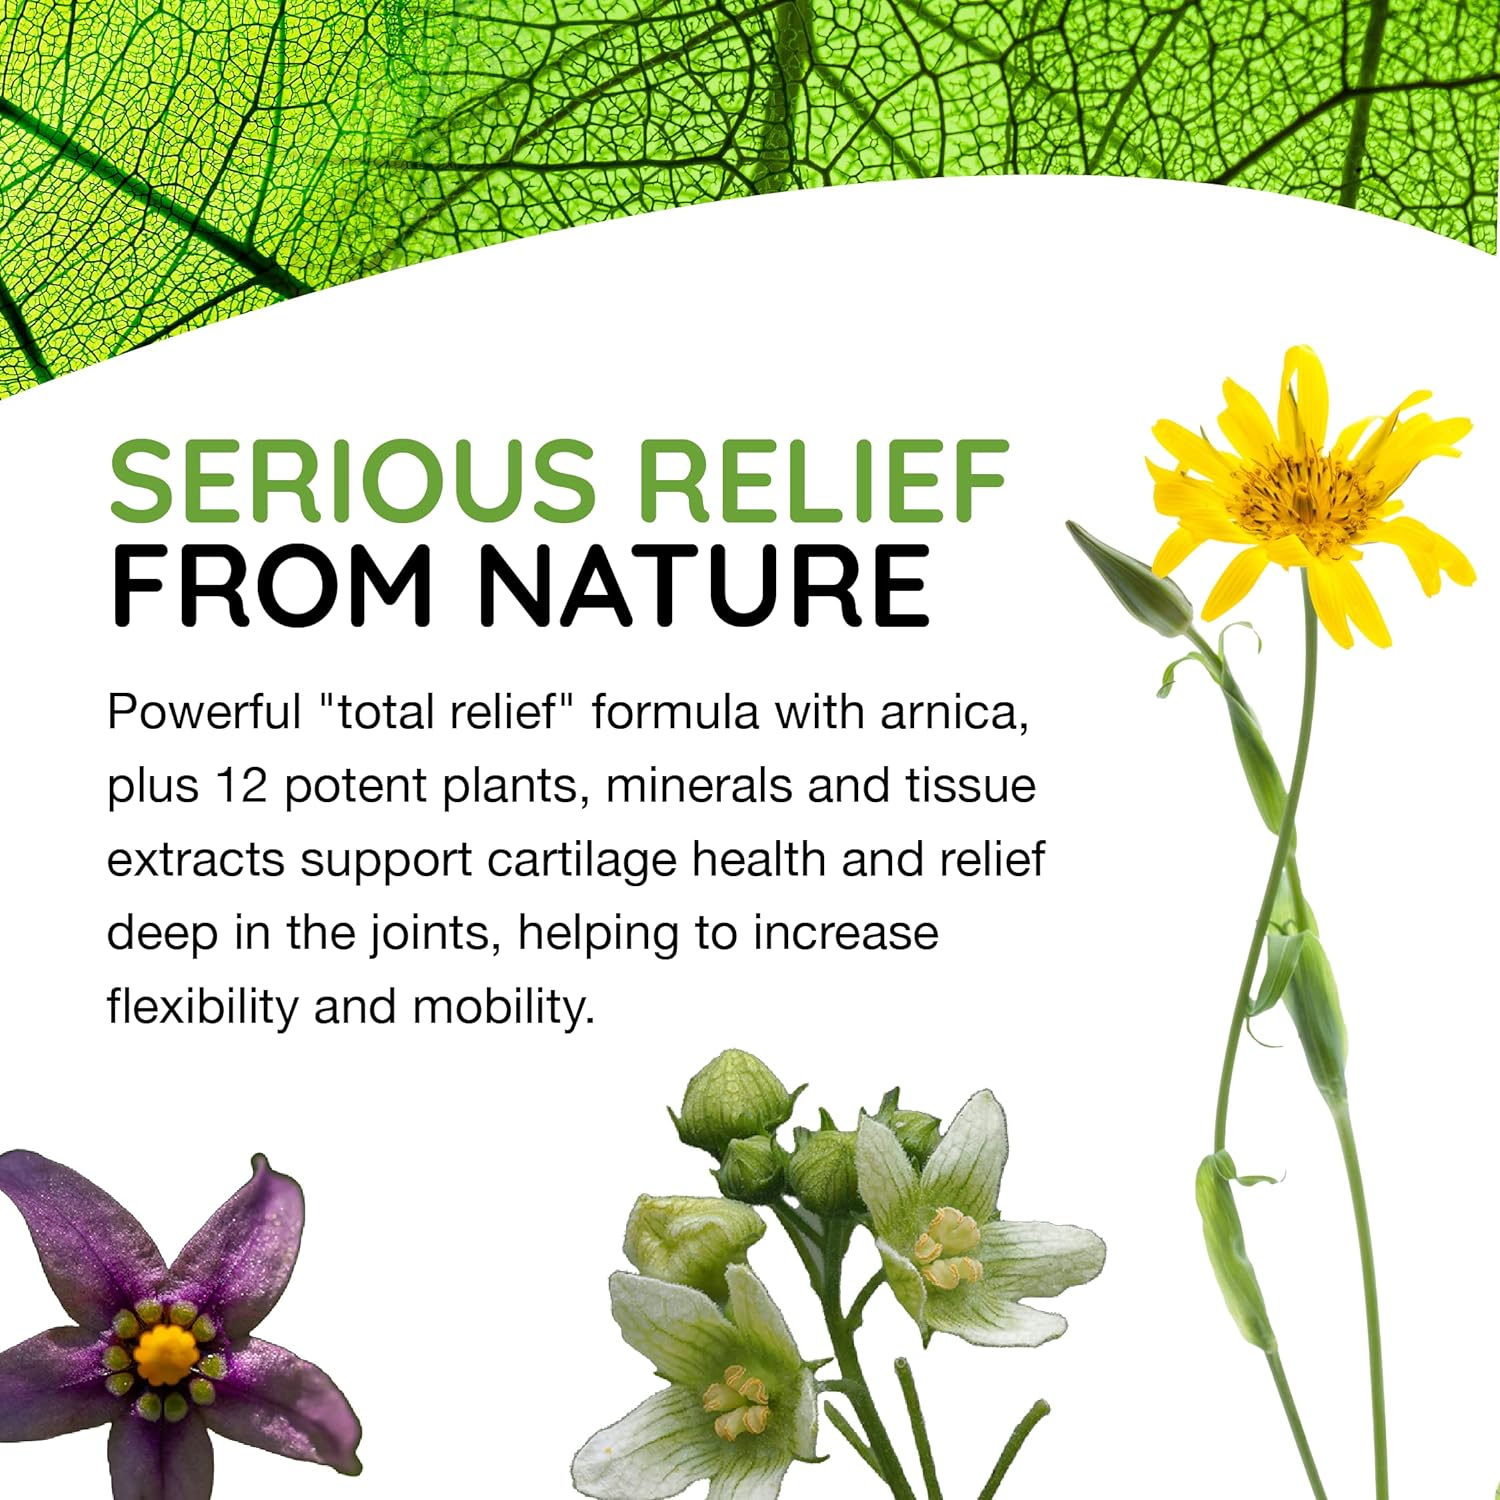 T-Relief Arthritis Arnica +12 Pain Relieving Natural Medicines Help Re